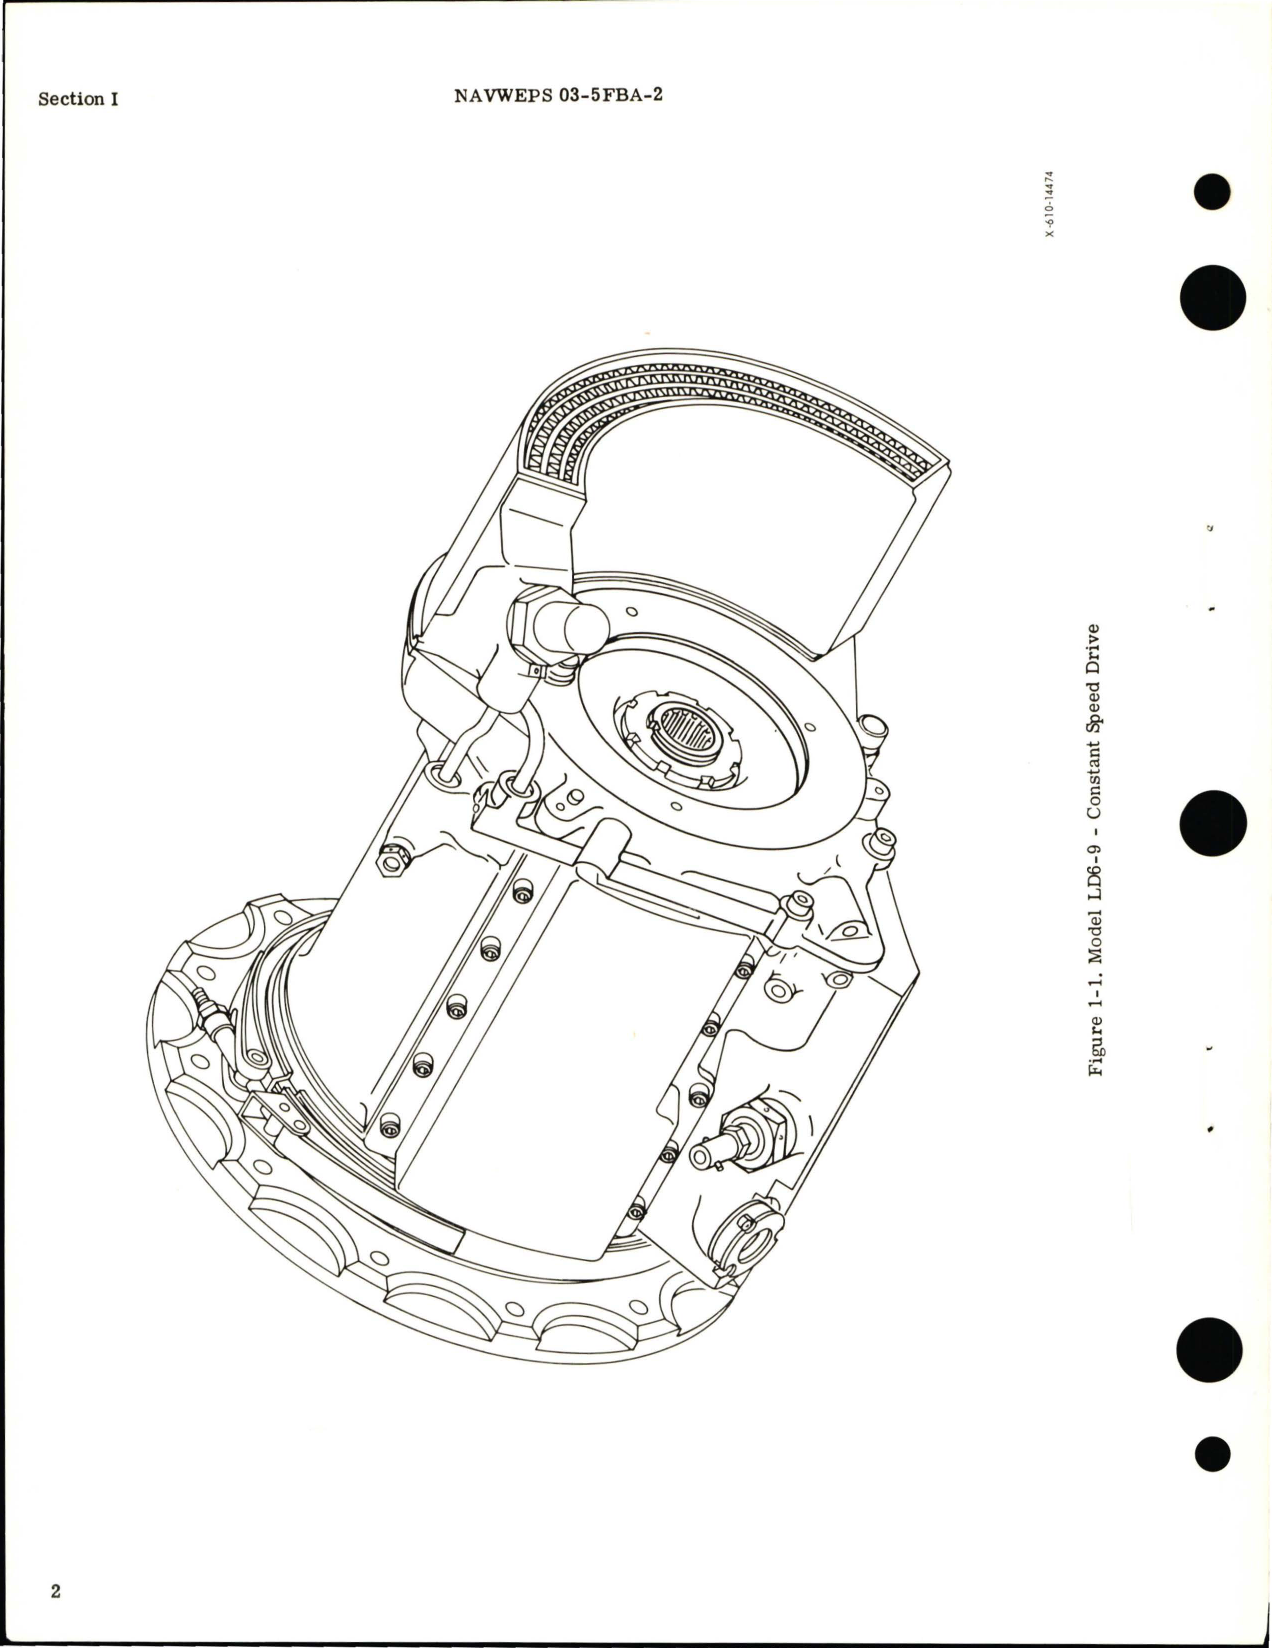 Sample page 8 from AirCorps Library document: Overhaul Instructions for Constant Speed Drive - Models LD6-3, LD6-9, and LD6-10 - Parts 209500, 209700, and 209755 